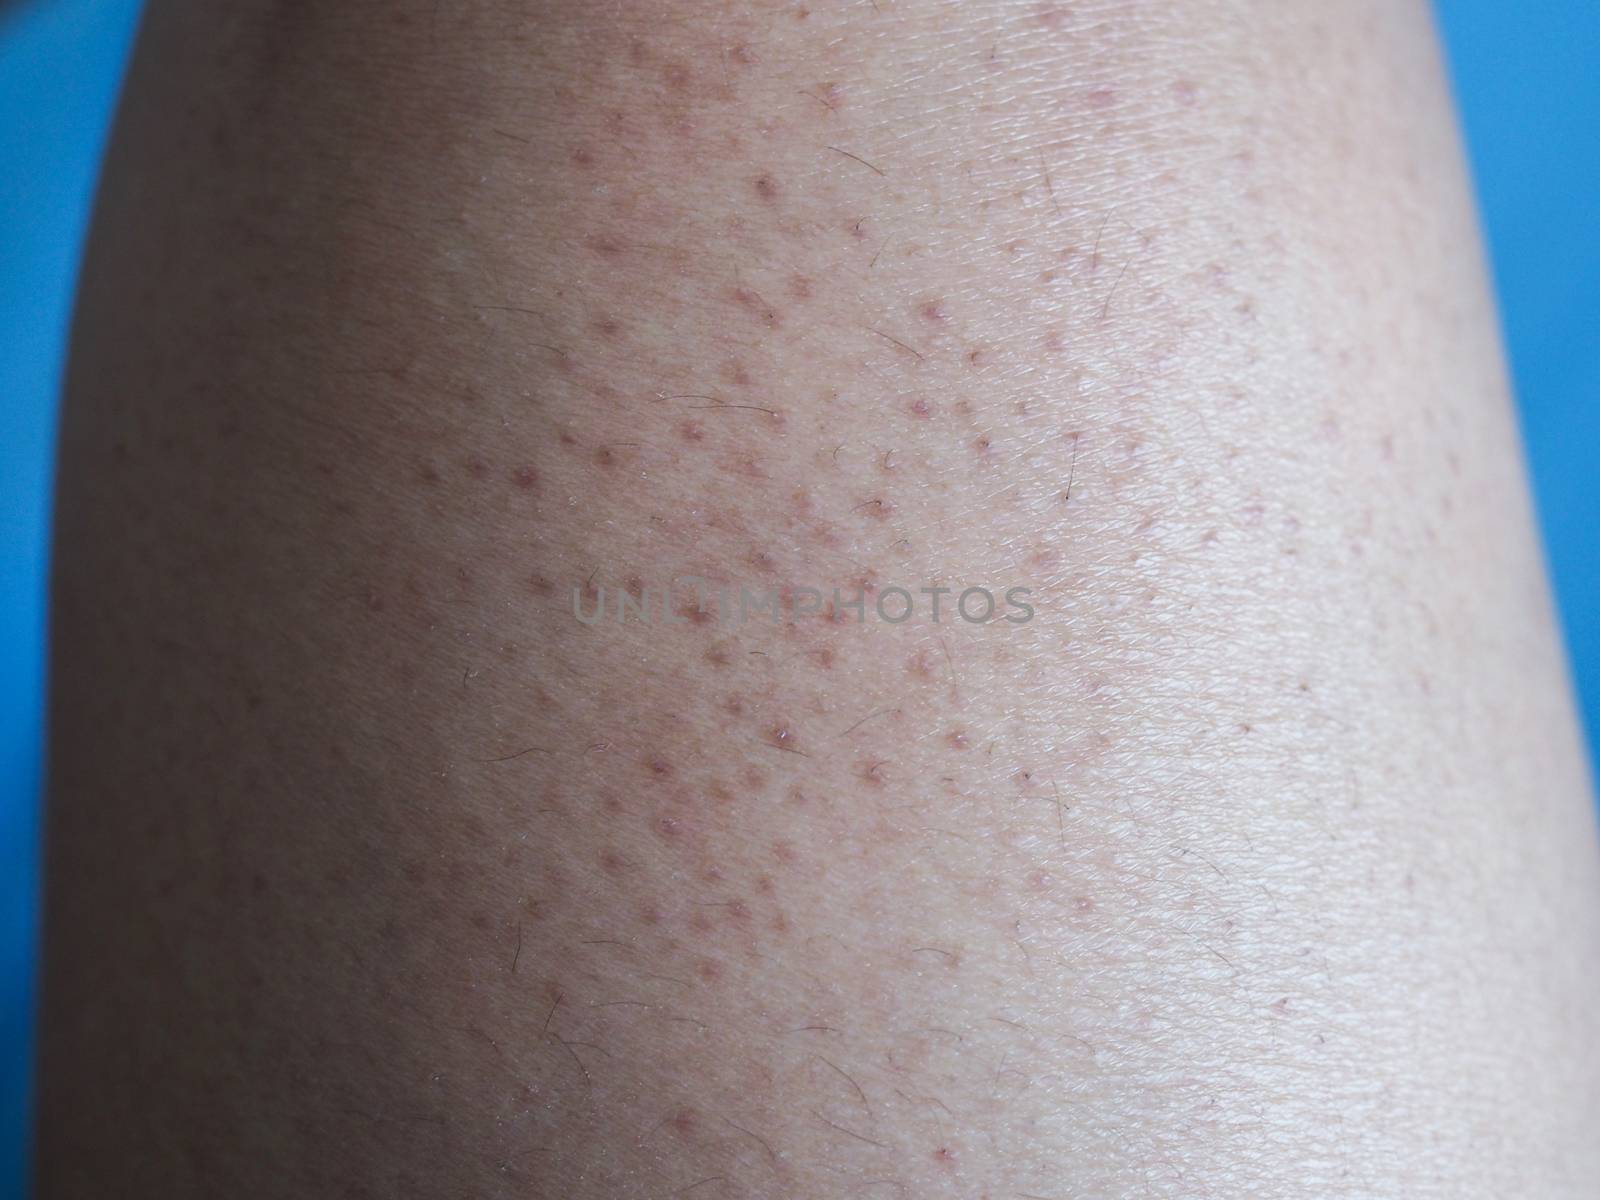 Problems of Body Skin, large pores and dark colors on legs.